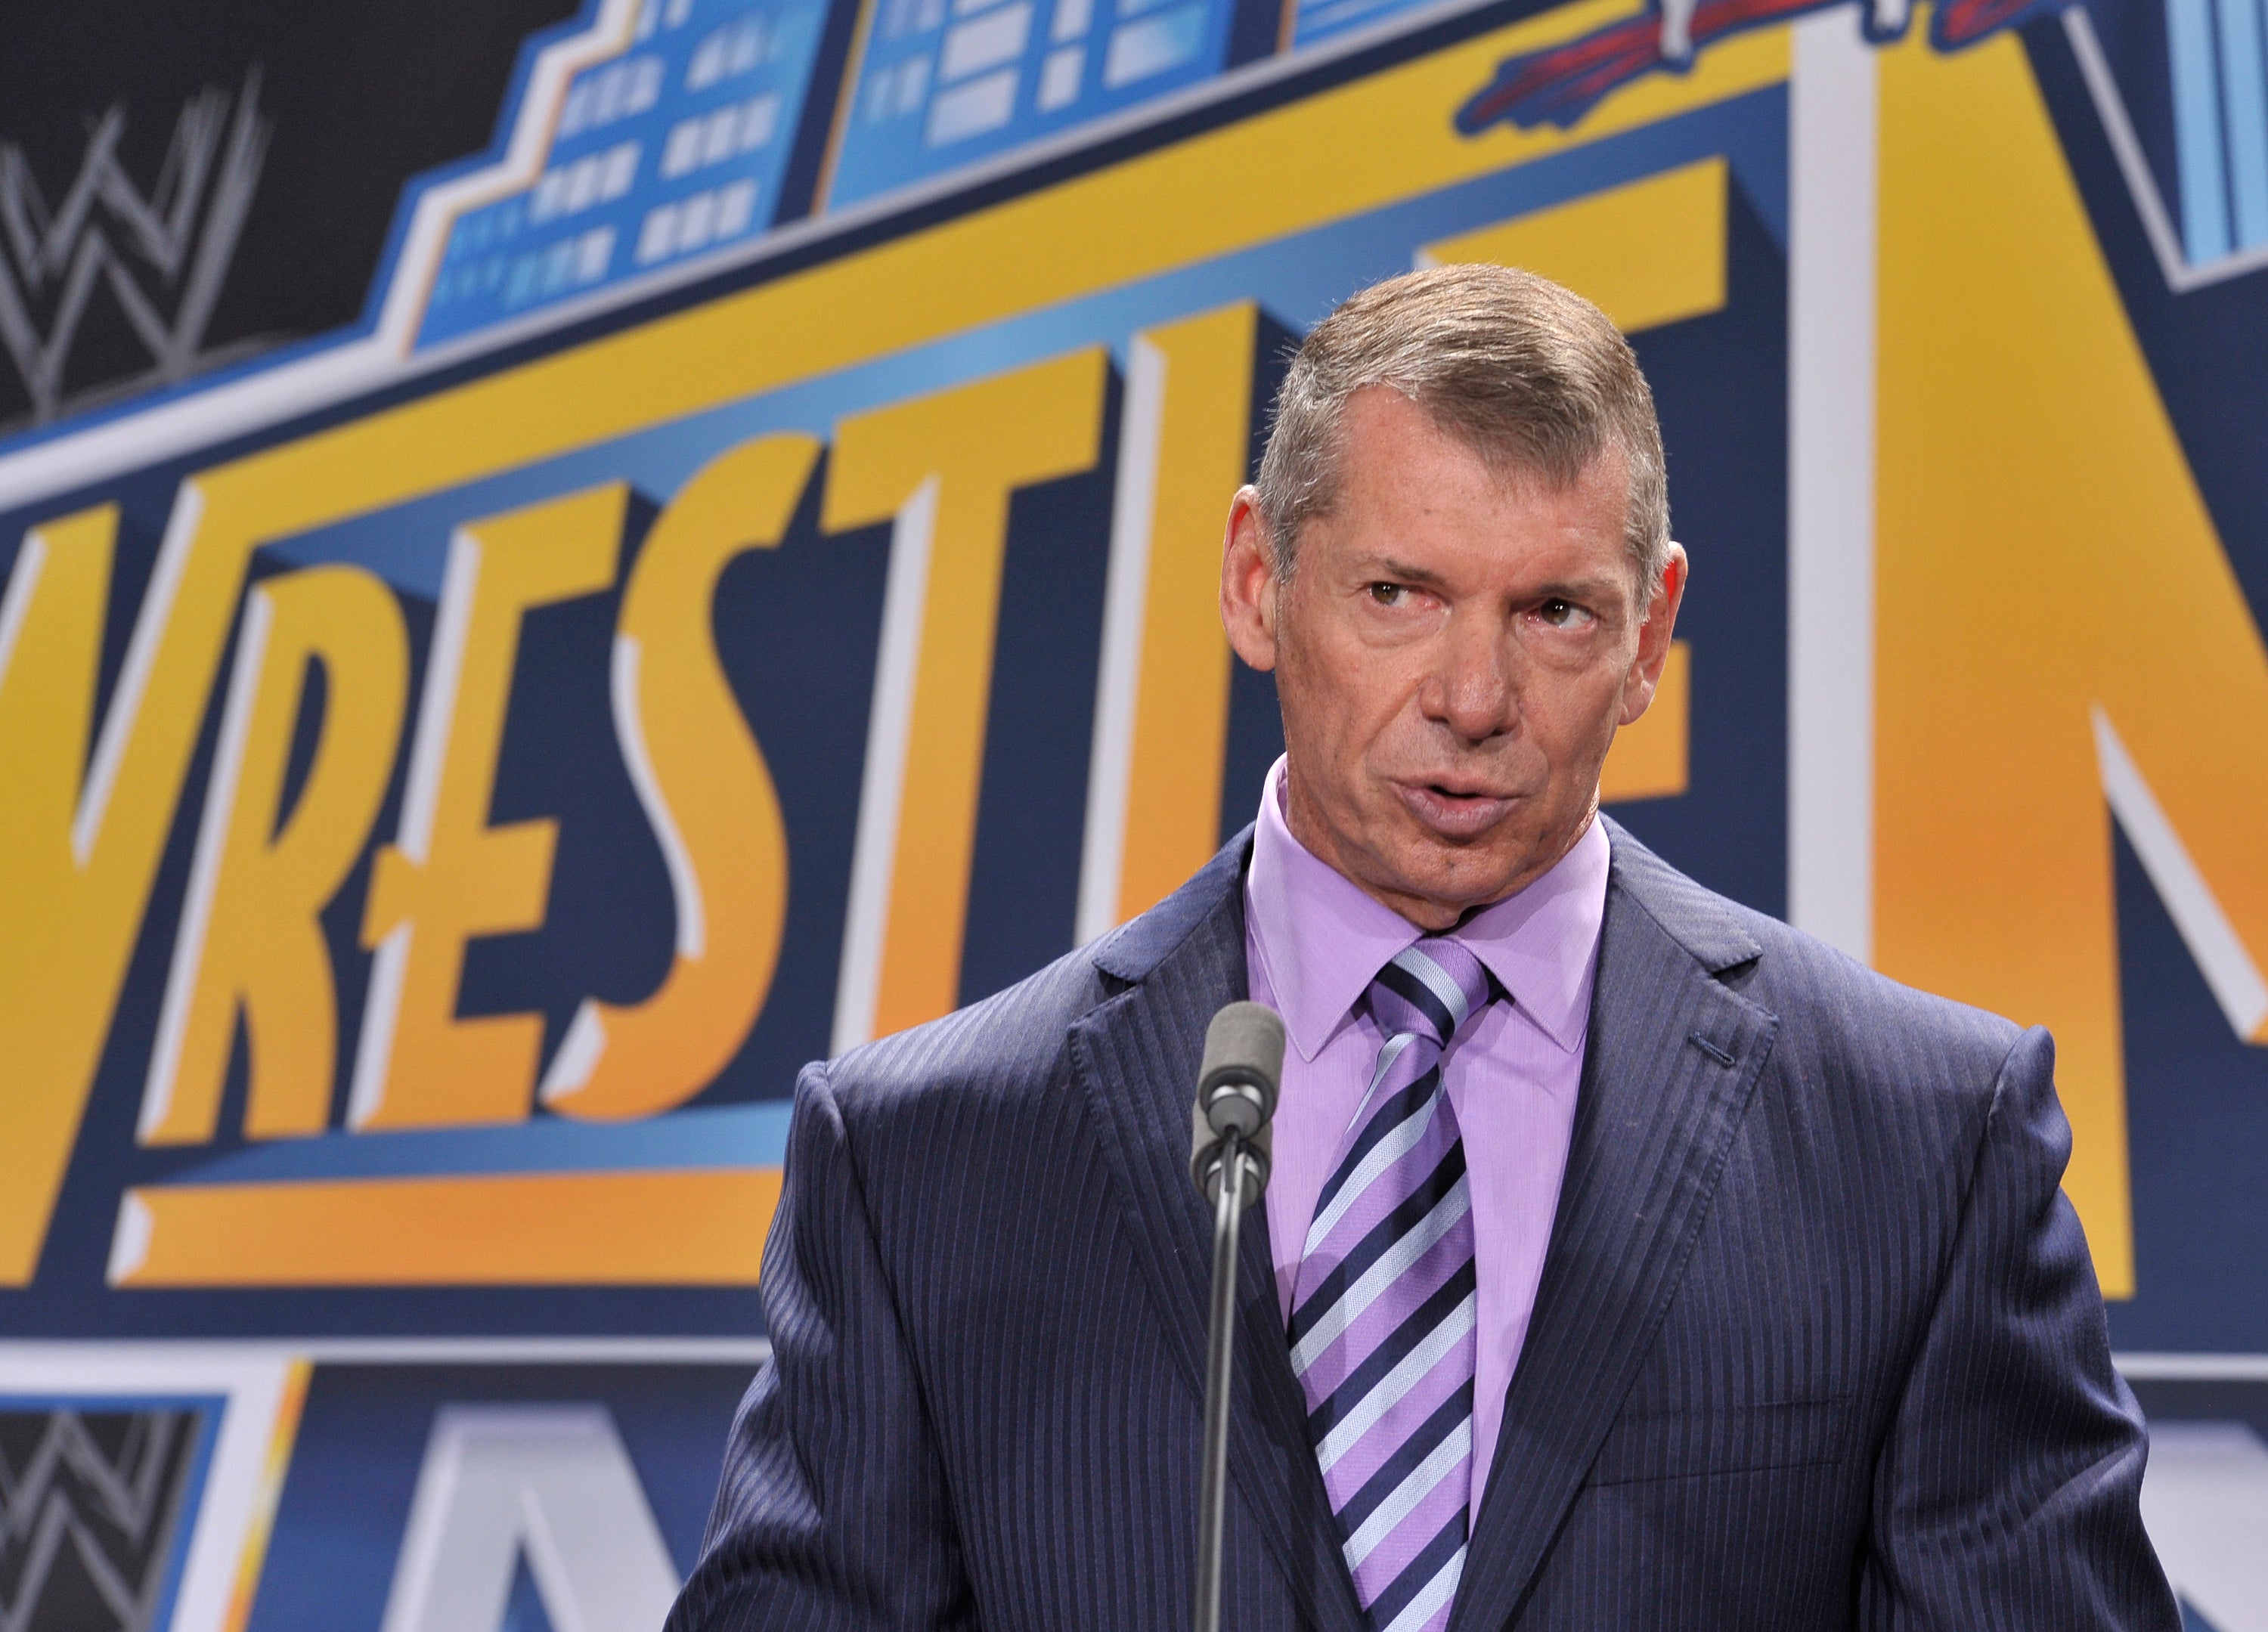 WWE founder Vince McMahon has been sued by a former employee for allegedly sex trafficking her to court prospective wrestlers